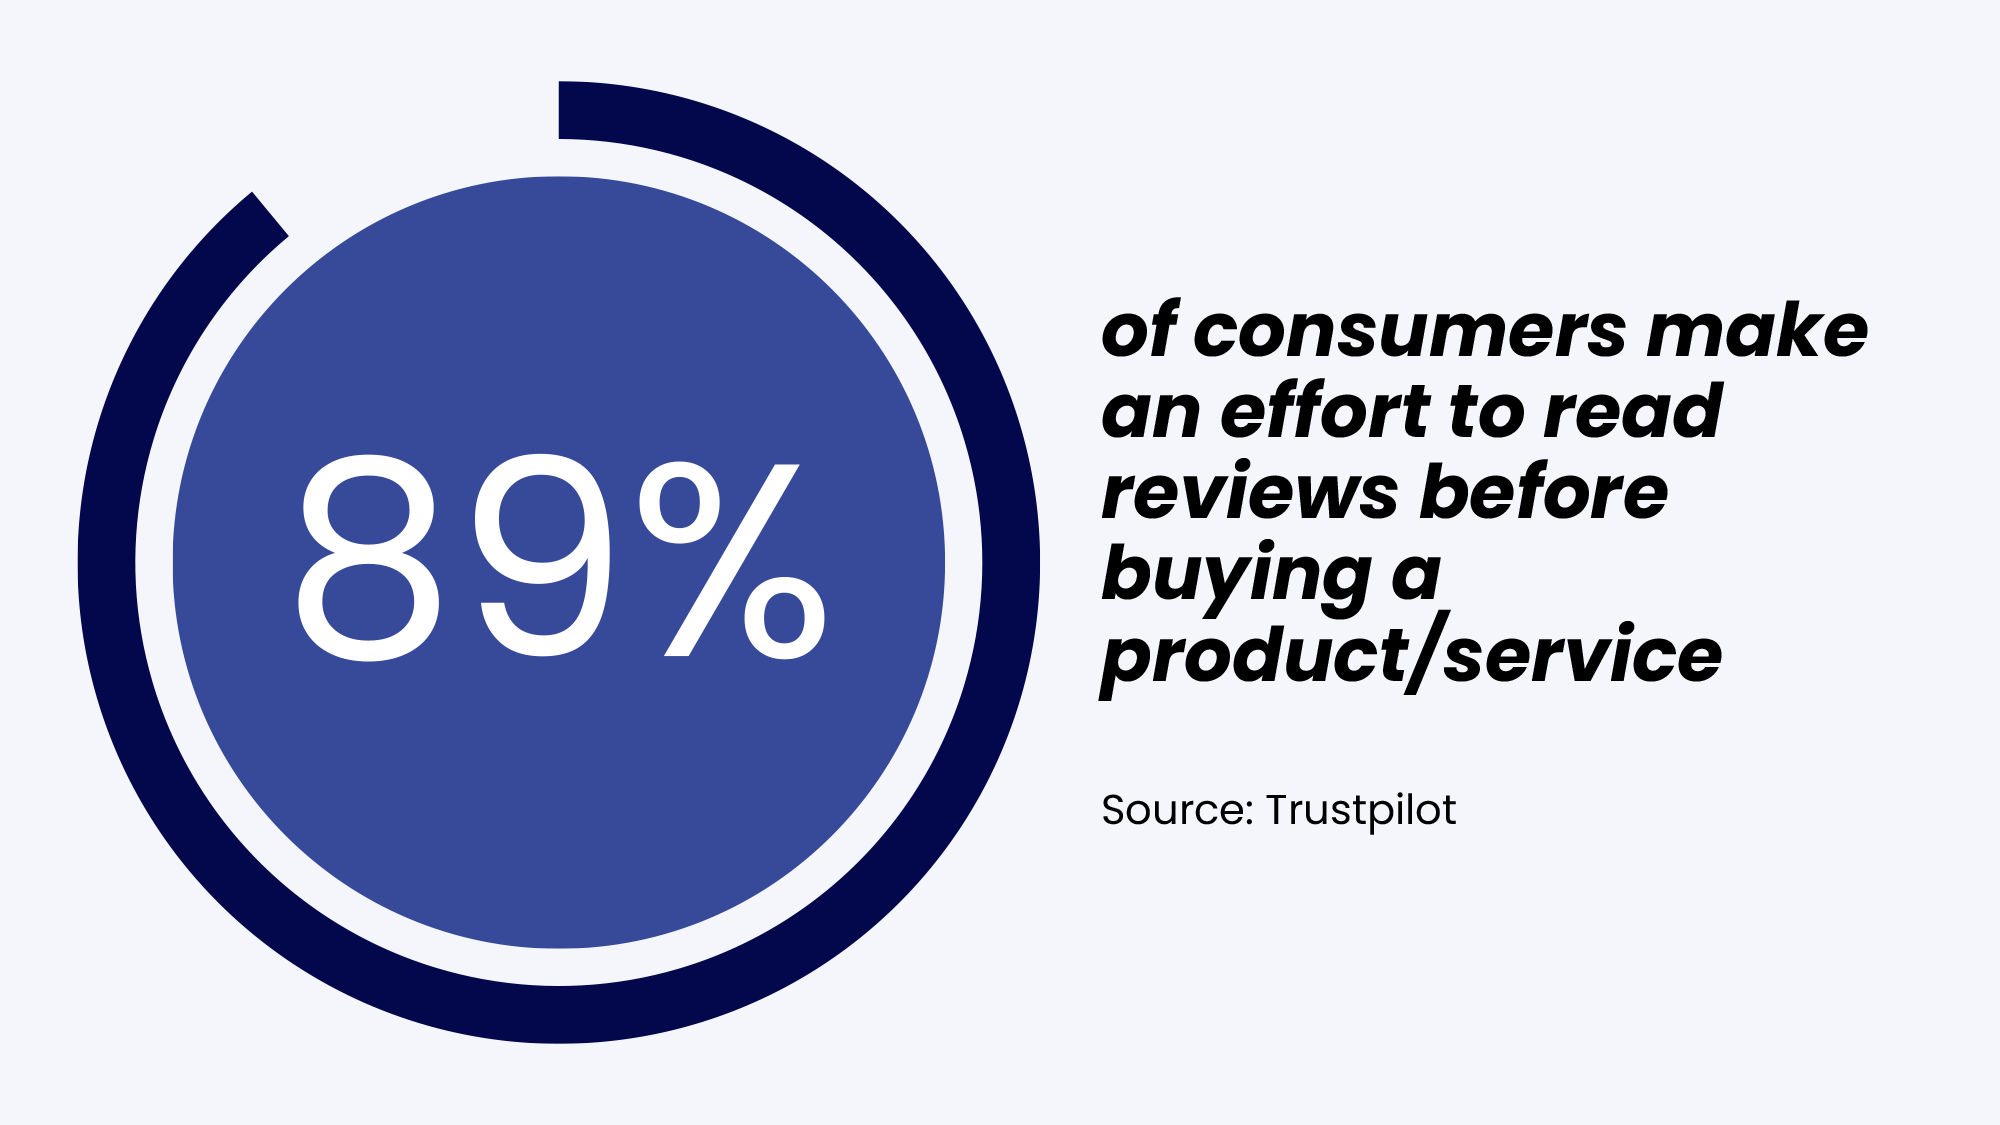 89% of consumers make an effort to read reviews before buying a productservice